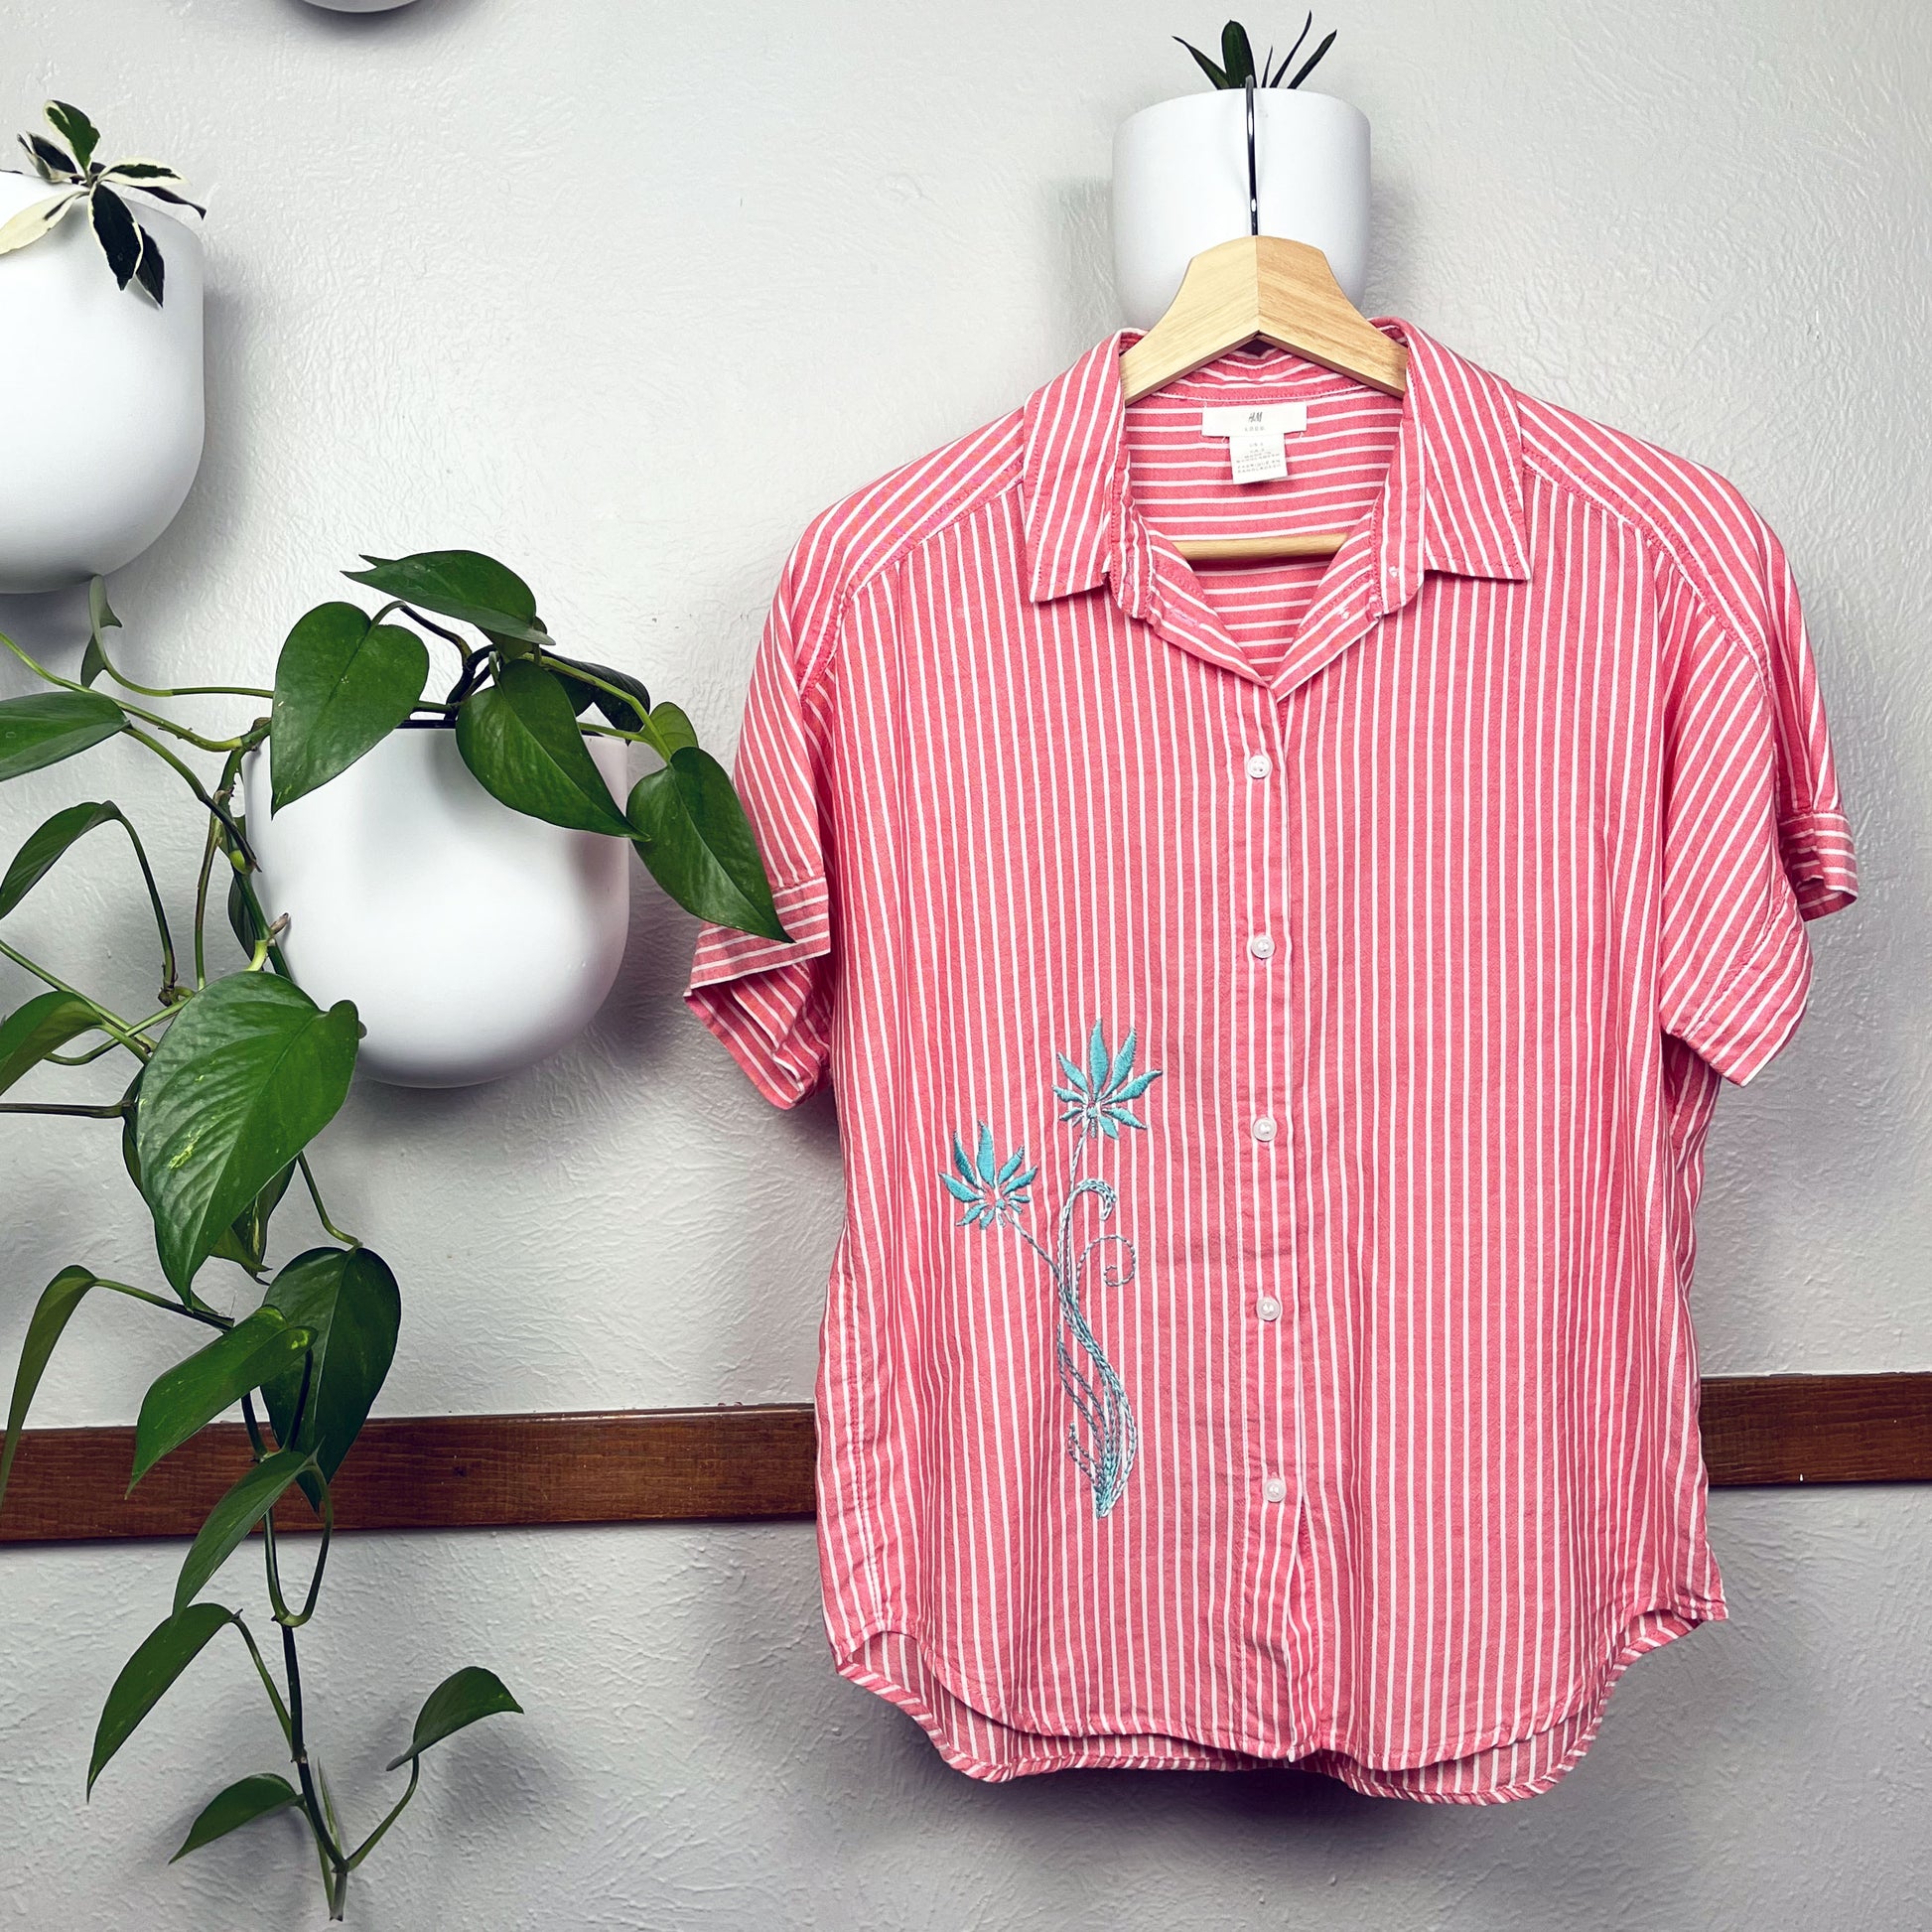 a red and white striped button-up short sleeve shirt, with two hand embroidered long stemmed flowers in aqua on the lower front right side of the shirt, on a wooden hanger with plants in round white pots hanging on the wall around it